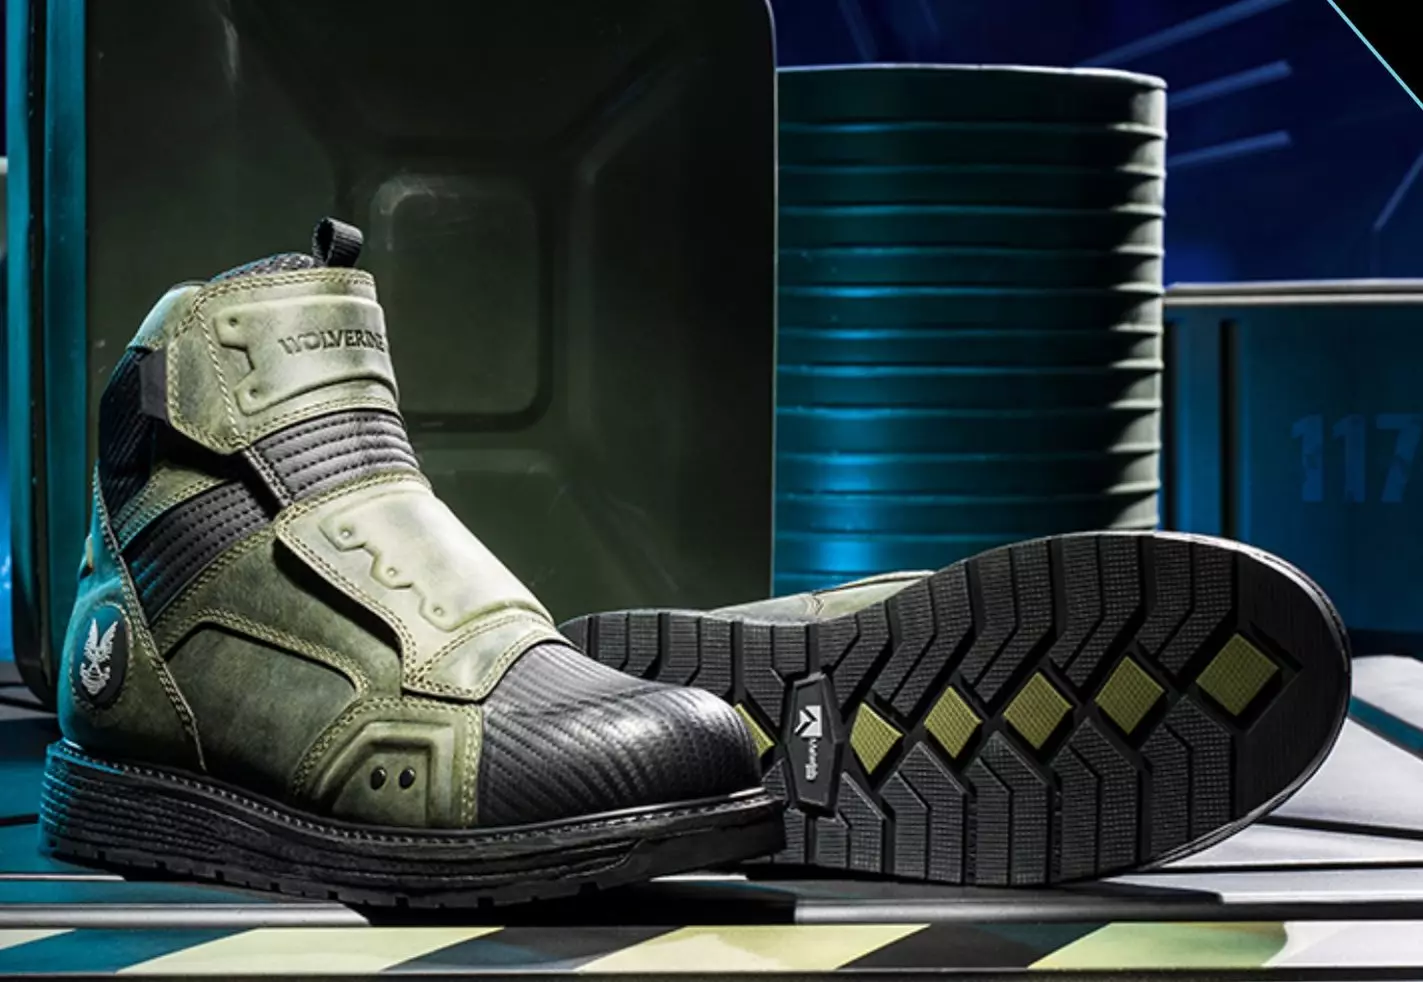 The Wolverine x Halo: The Master Chief boots /